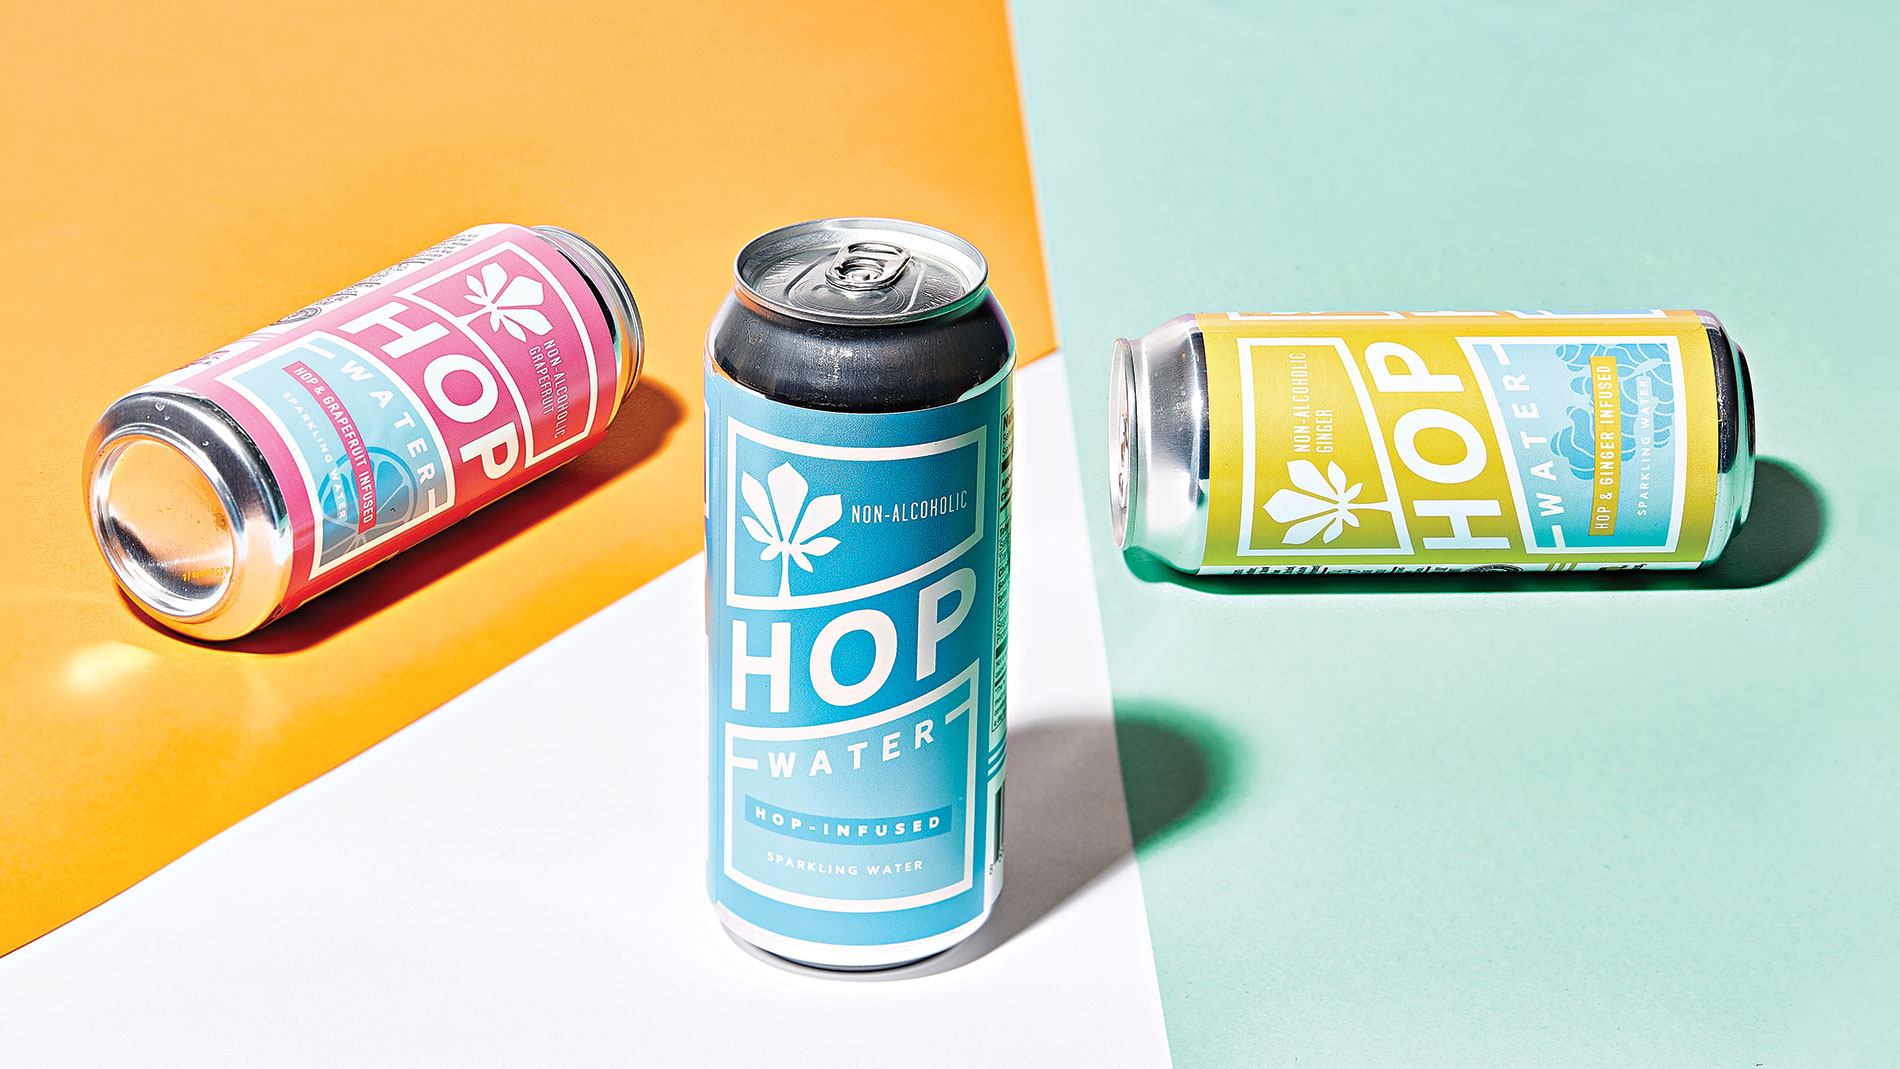 blue cans of hop water on a colorful background